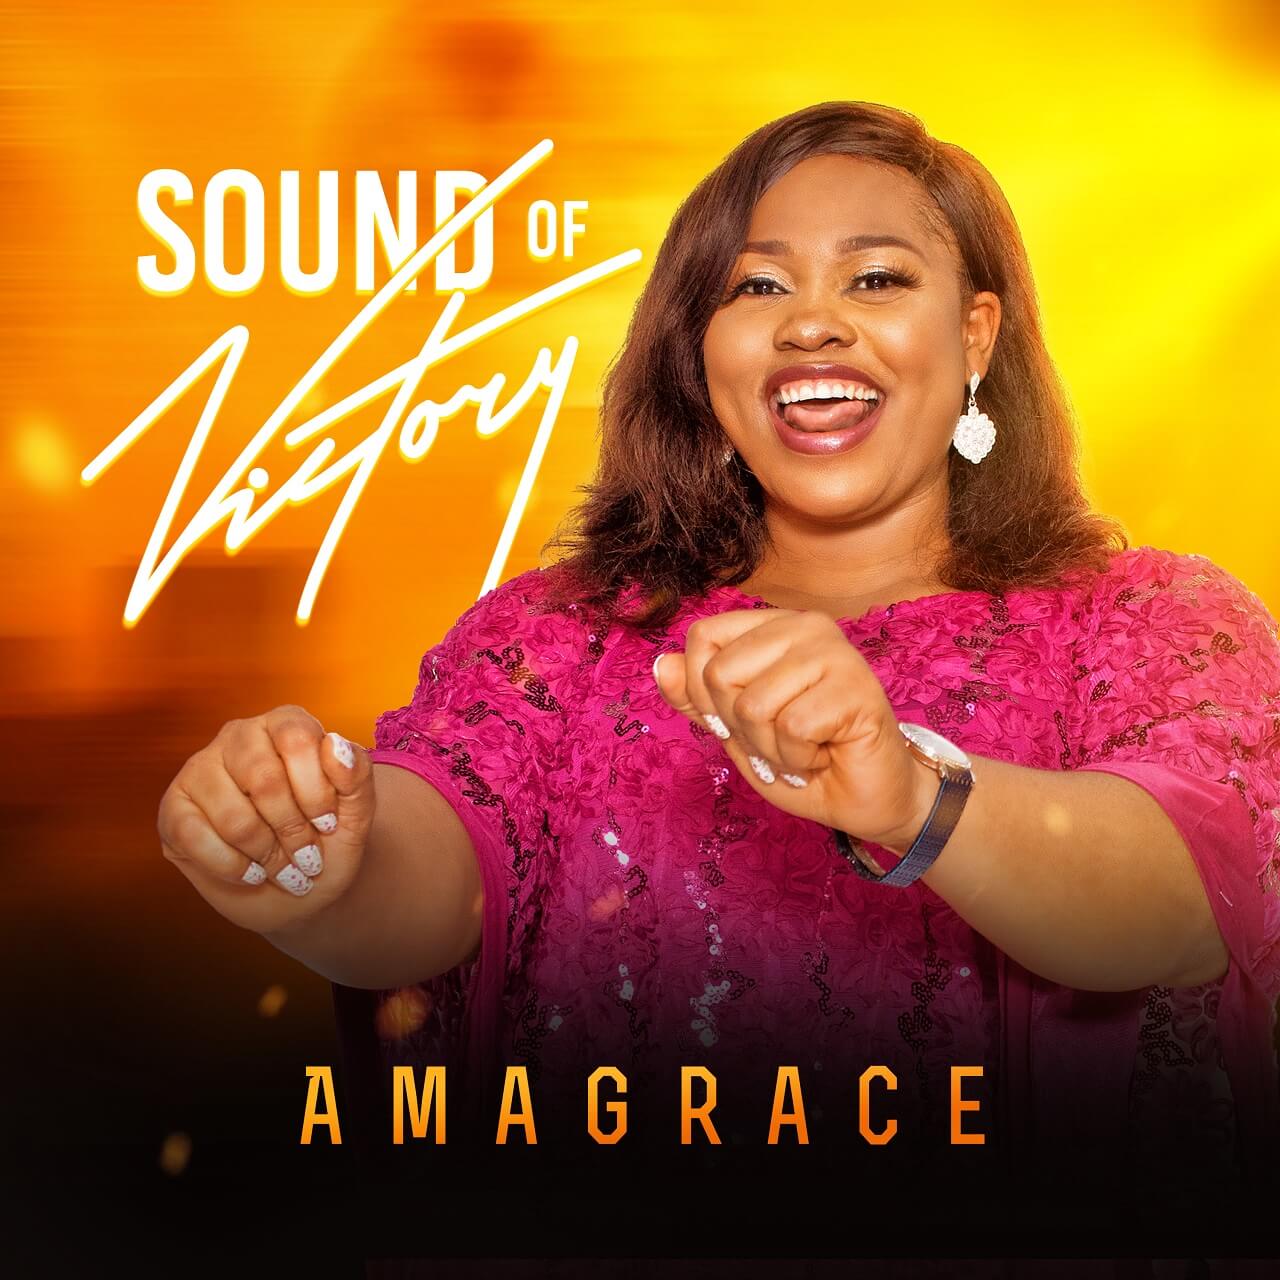 Amagrace Releases a “Sound of Victory” New Single, Lyric Video